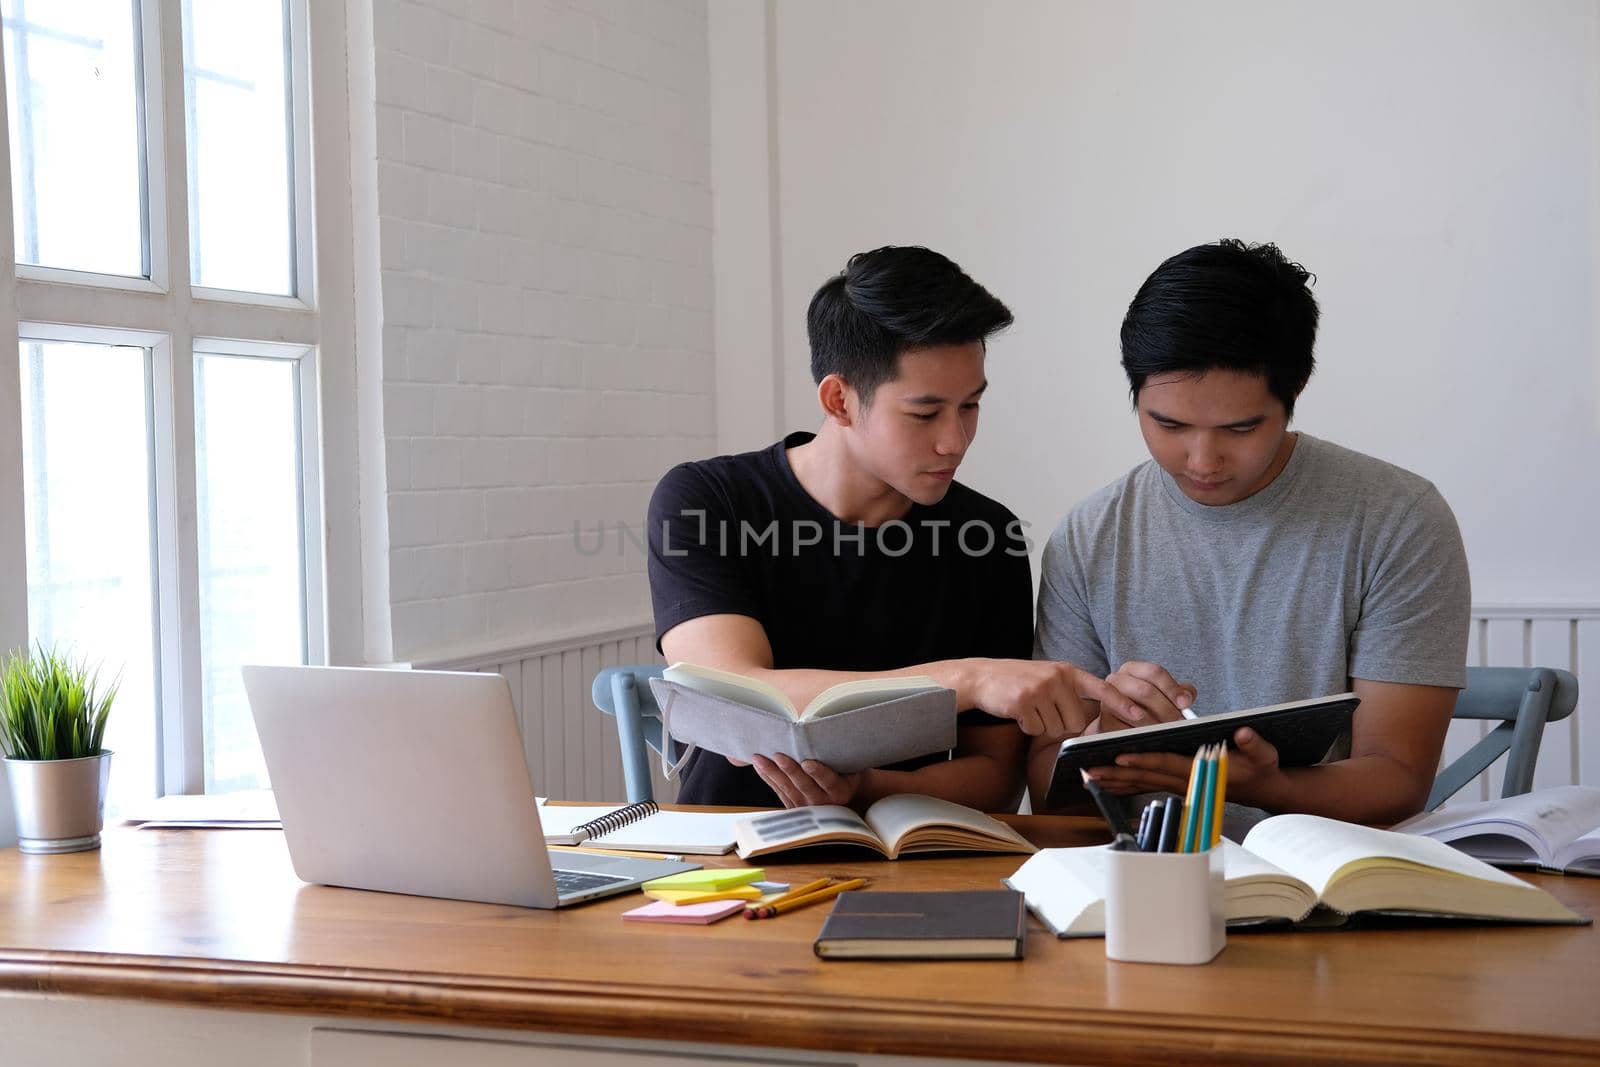 designer working on graphic tablet discussing creative idea of startup project with partner